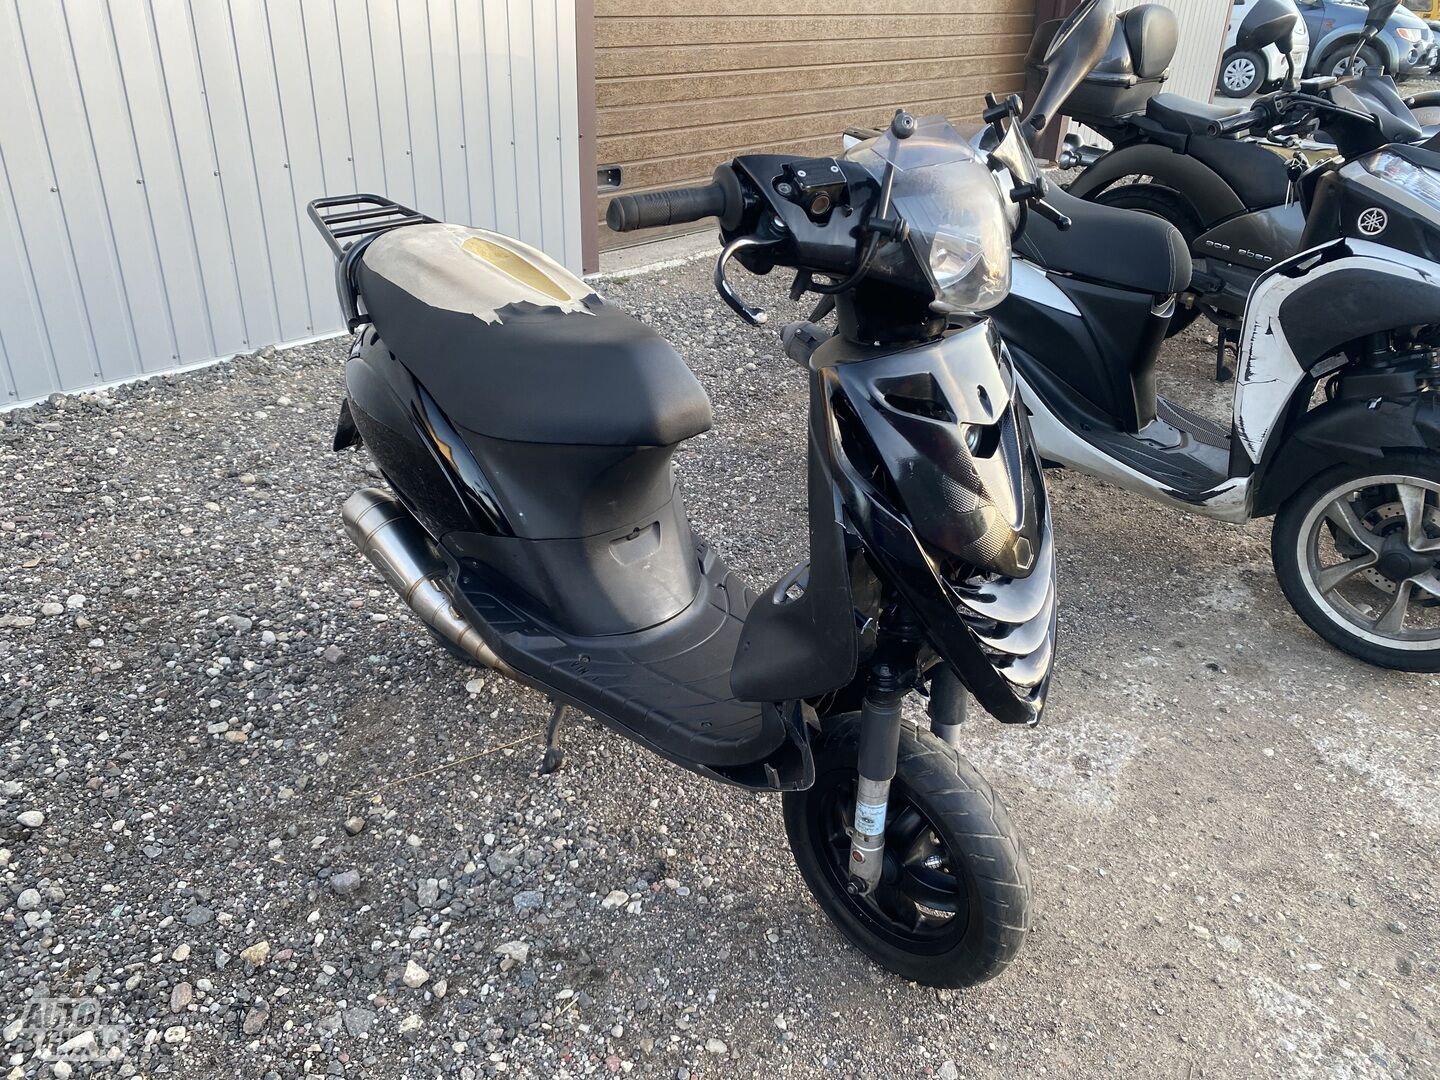 Piaggio ZIP 2017 y Scooter / moped